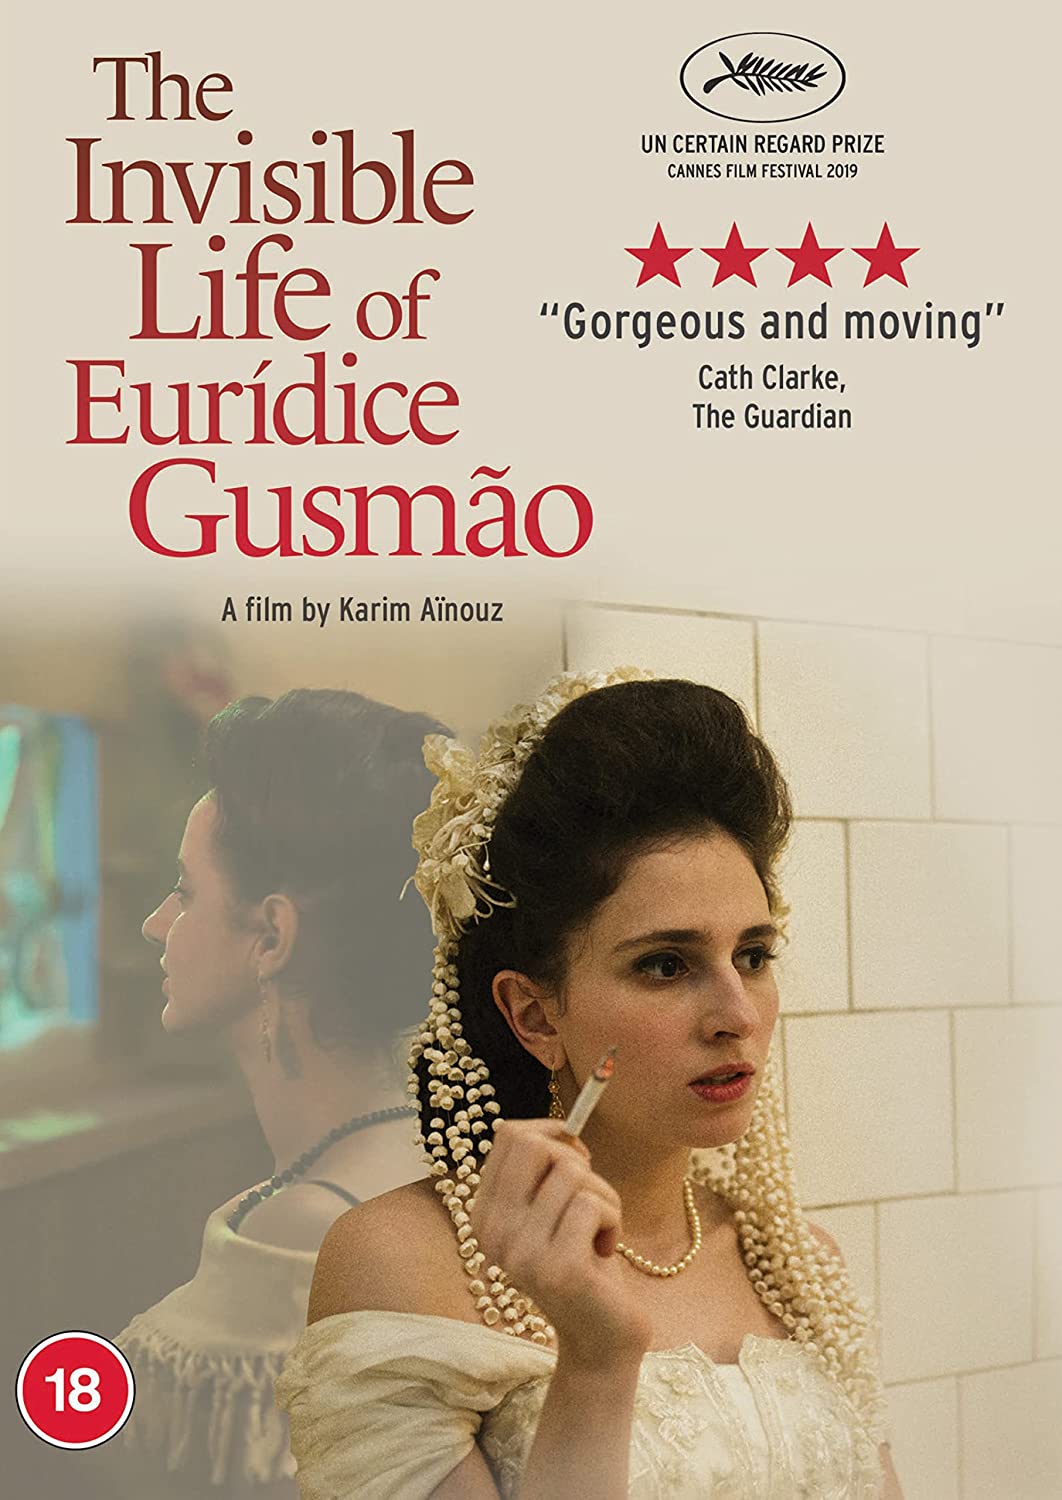 The Invisible Life of Euridice Gusmao - Romance [DVD]